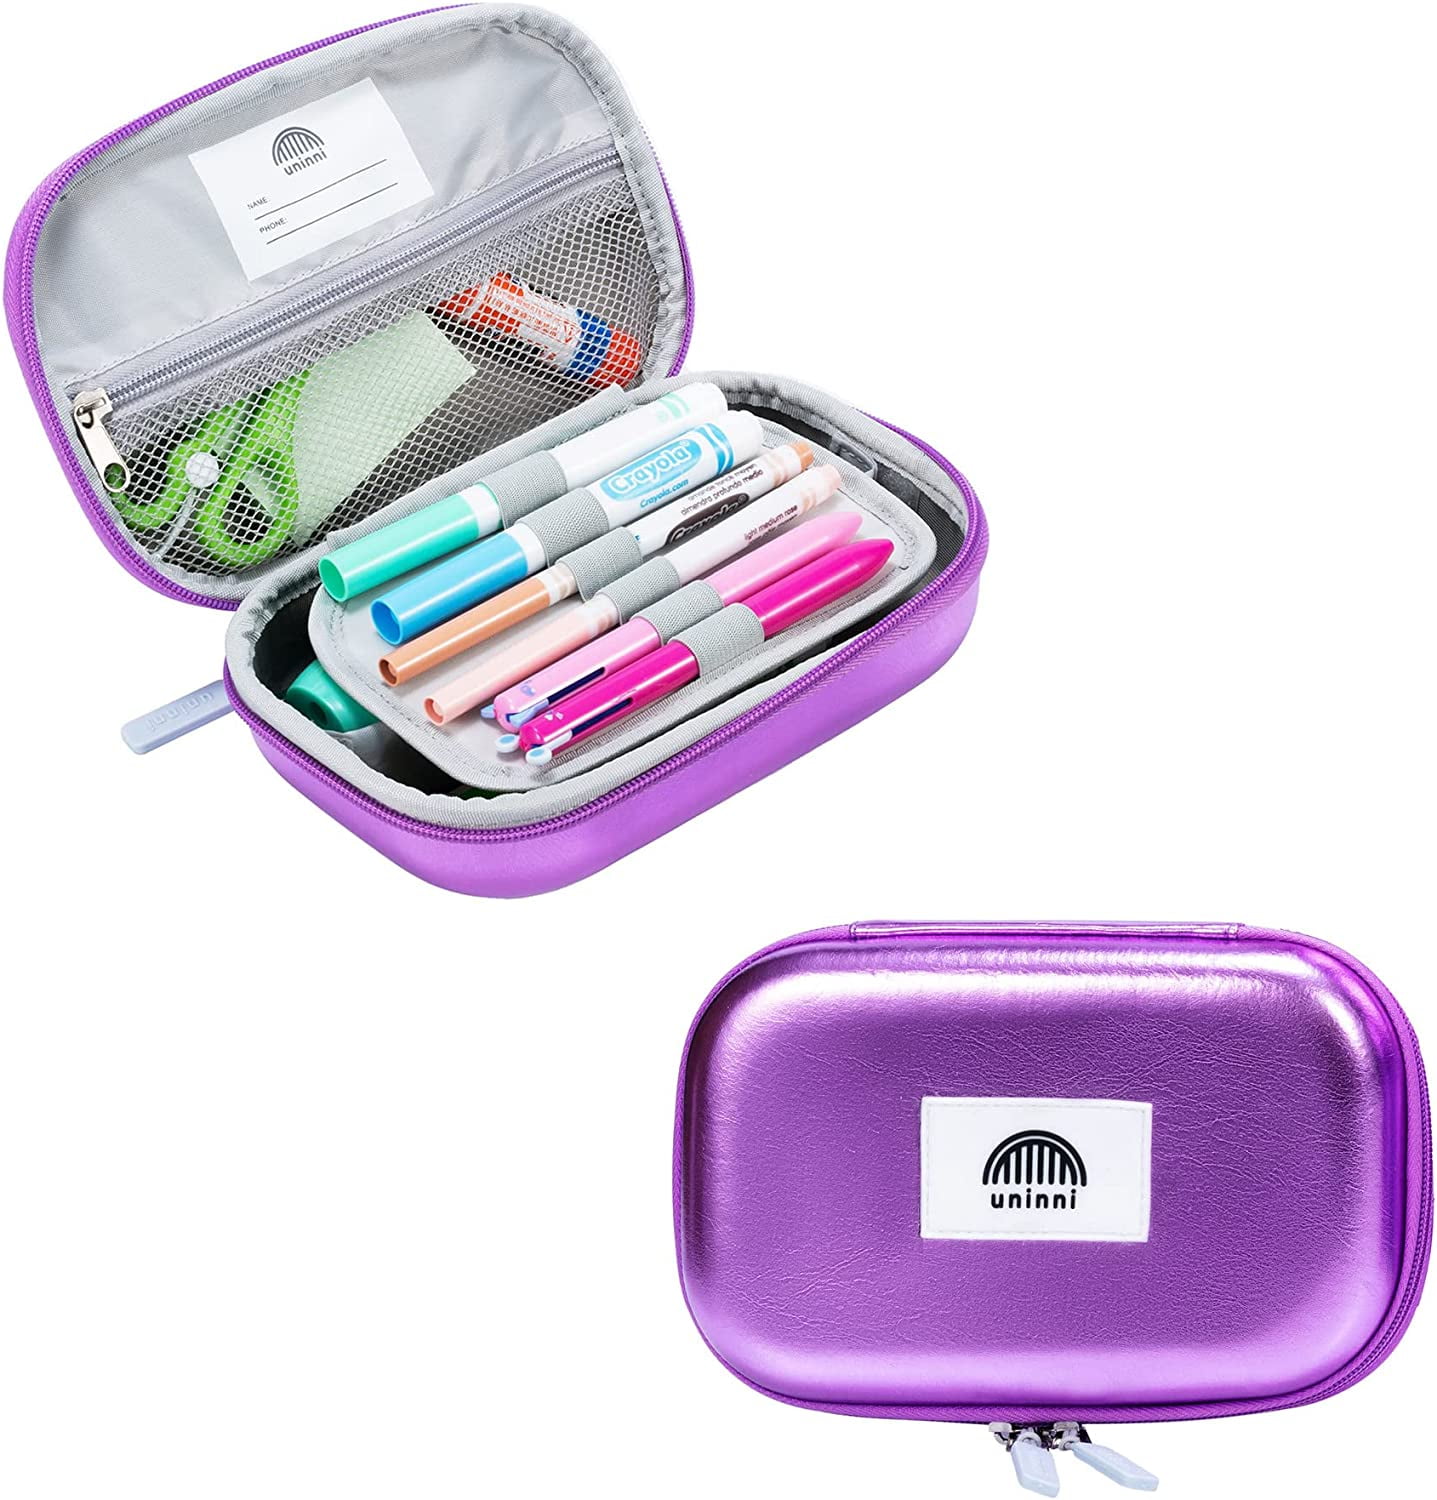 uninni Strokes Pencil Case for Girls and Boys - Large Kids Pencil Case with  Mesh Storage Pocket & 2 Removable Dividers for Organizing Markers & Pens.